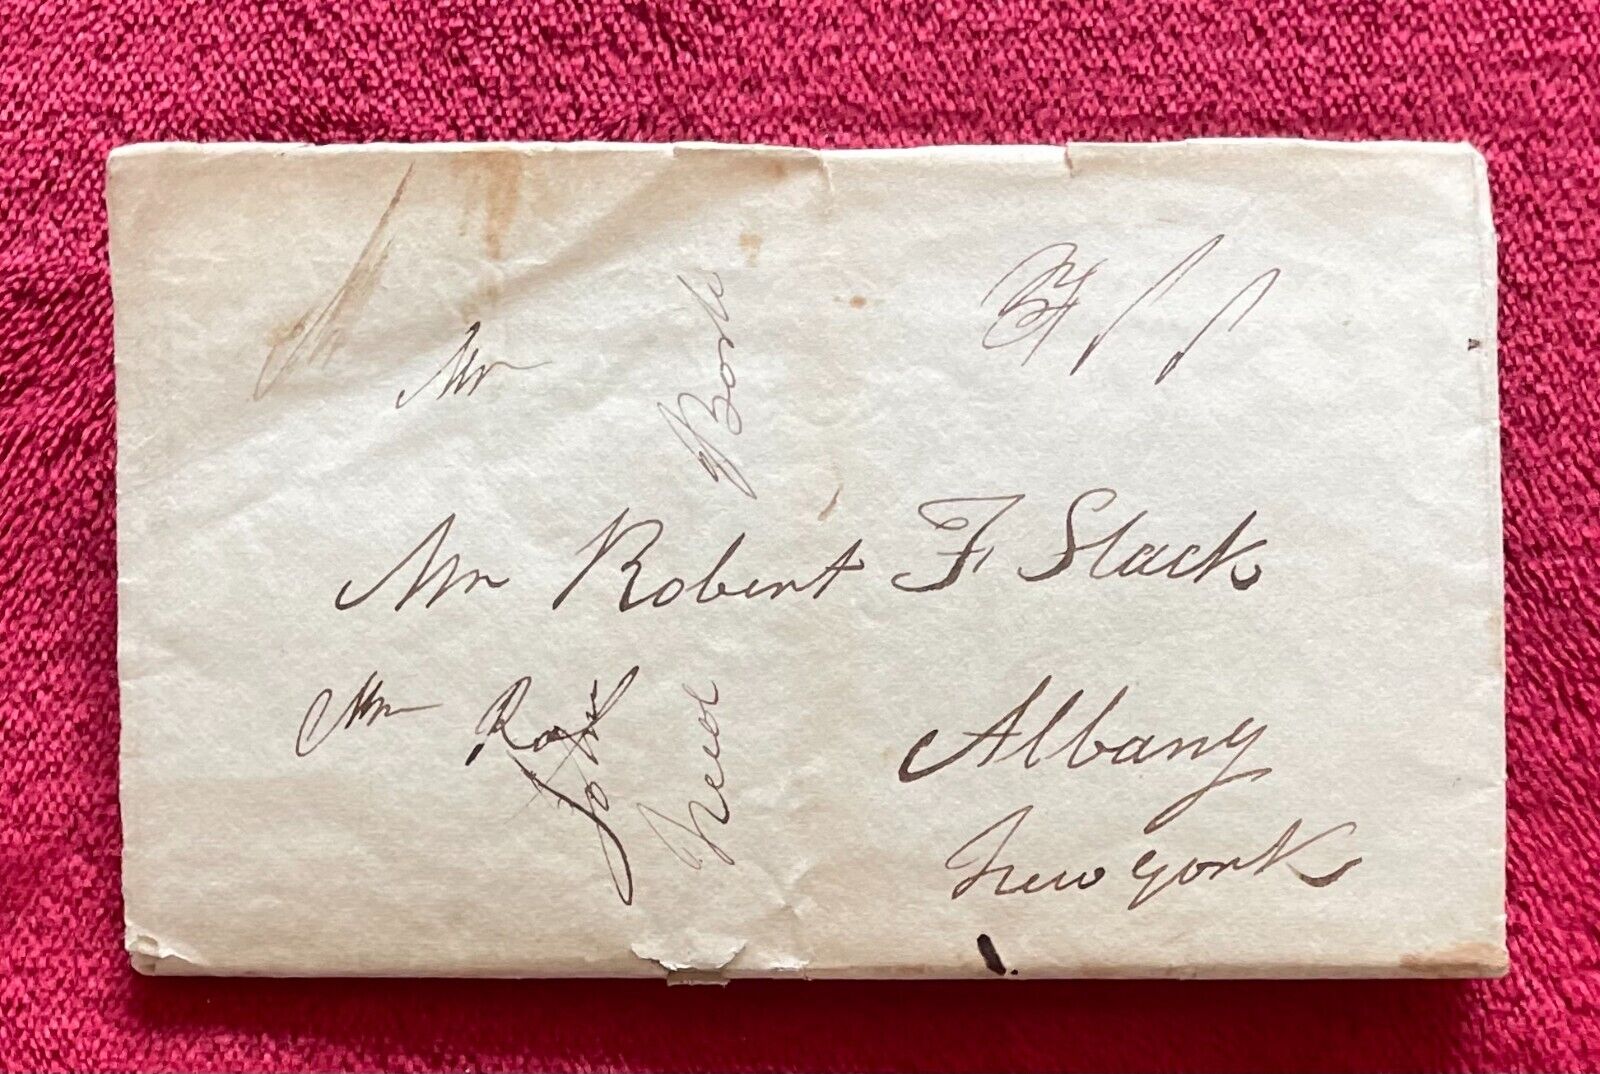 1831 STAMPLESS COVER LETTER ALBANY, NY - SALE OF PROPERTY TO HIGHEST BIDDER